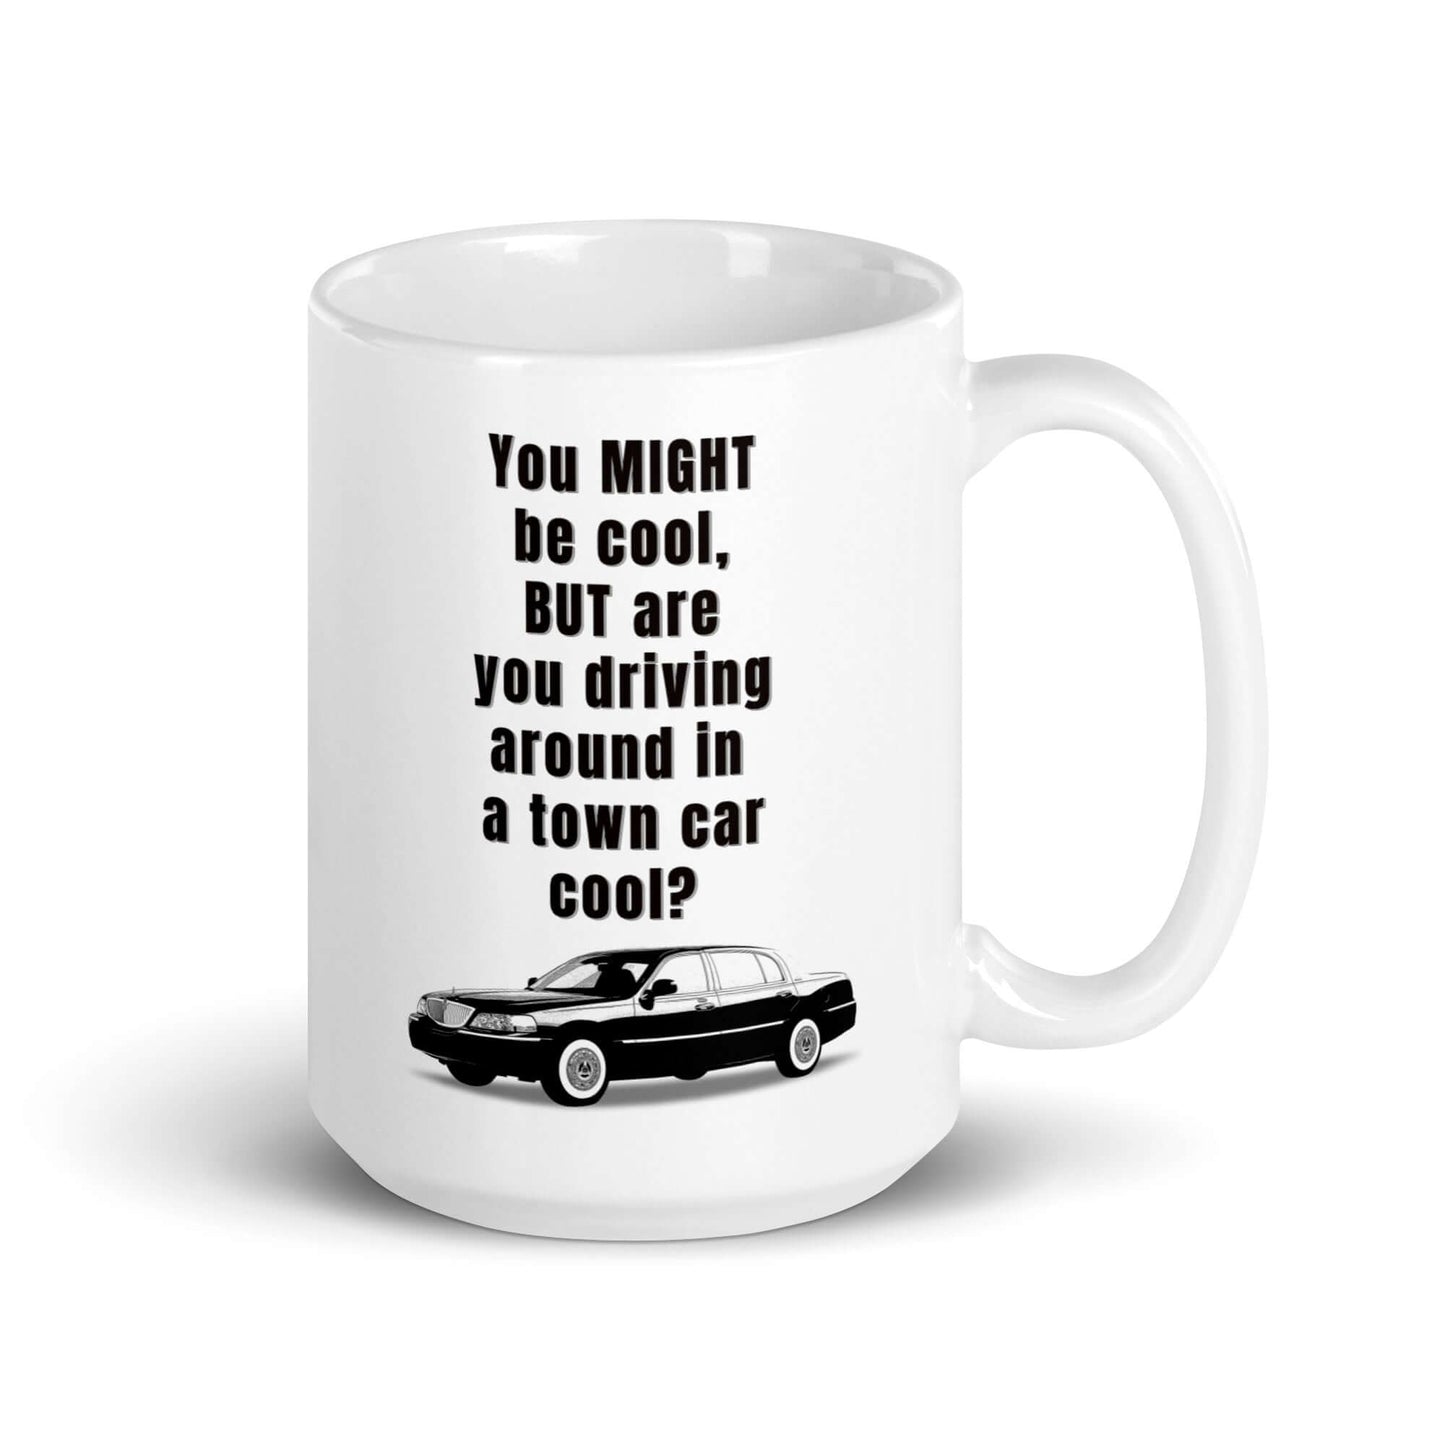 You MIGHT be cool, but are you driving around in a town car cool - White glossy mug 90's car car classic car ford ford panther gas car gasoline car large car Lincoln Car Lincoln TOwn Car Muscle Car Panther Panther Mafia Panther Mobile panther platform Sports car Street Car Town Car Vintage Car